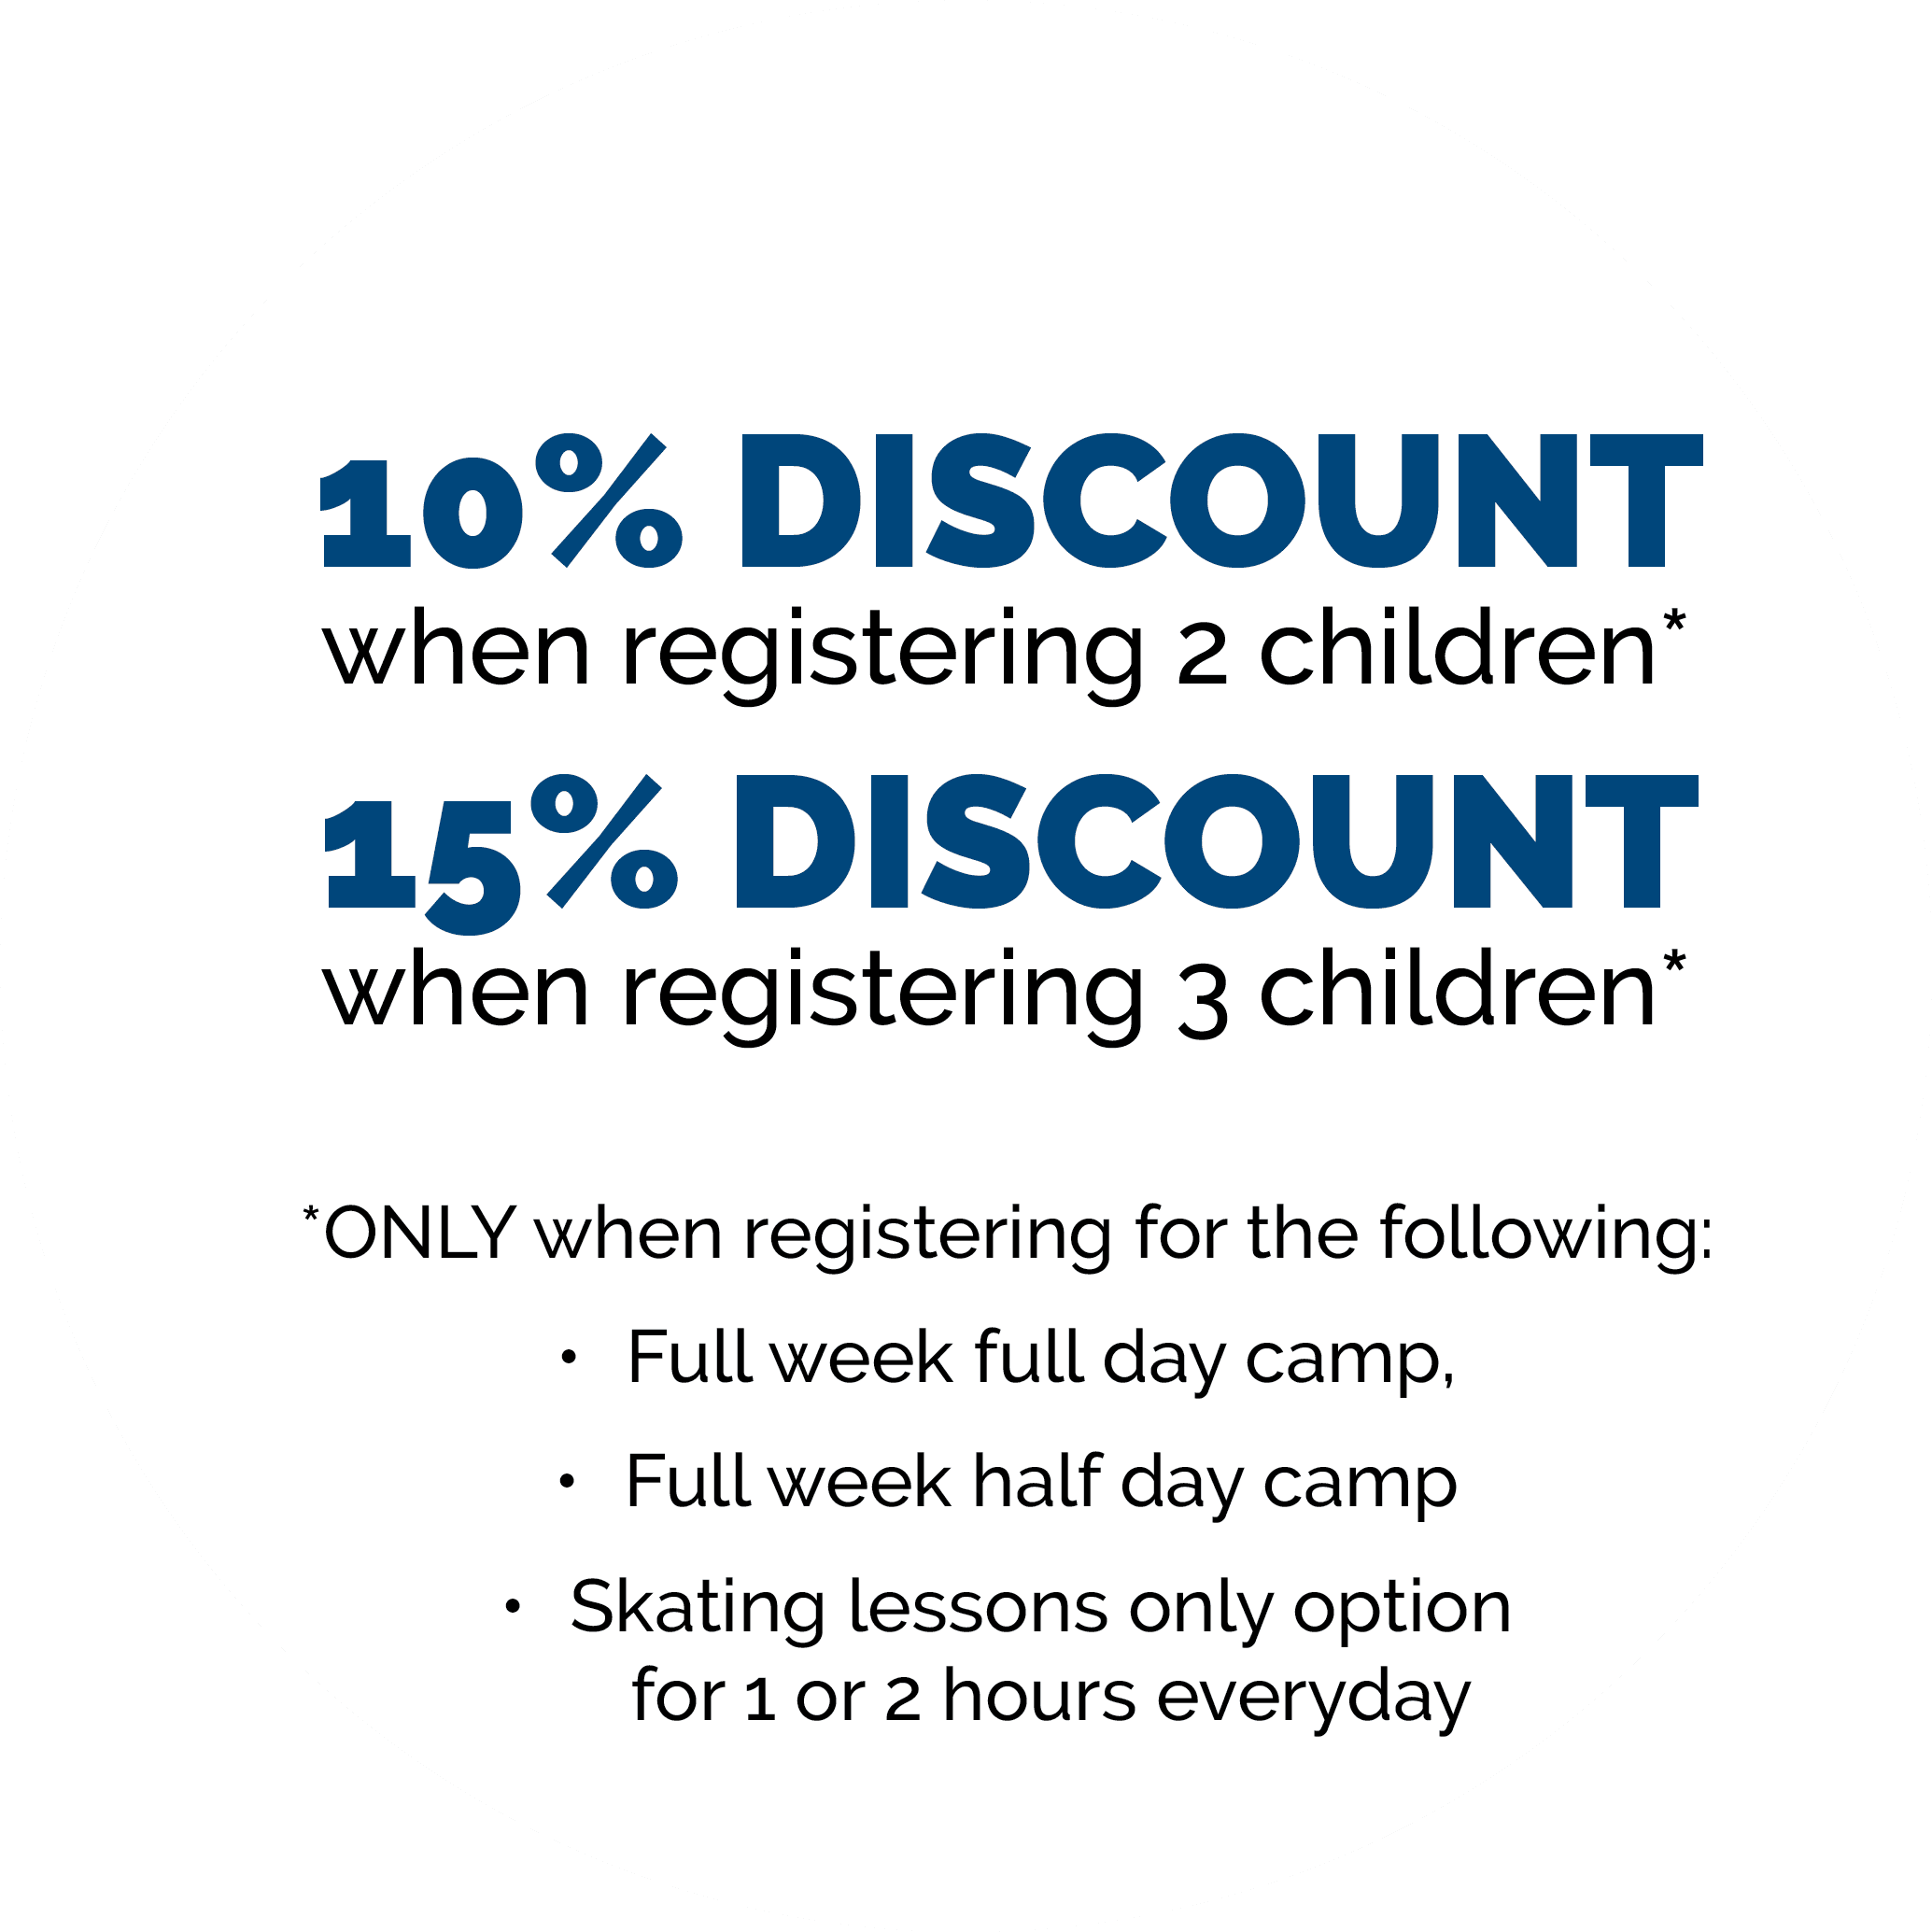 10% Discount when registering 2 children* 15% Discount when registering 3 children* *ONLY when registering for the following: Full week full day camp, Full week half day camp Skating lessons only option for 1 or 2 hours everyday